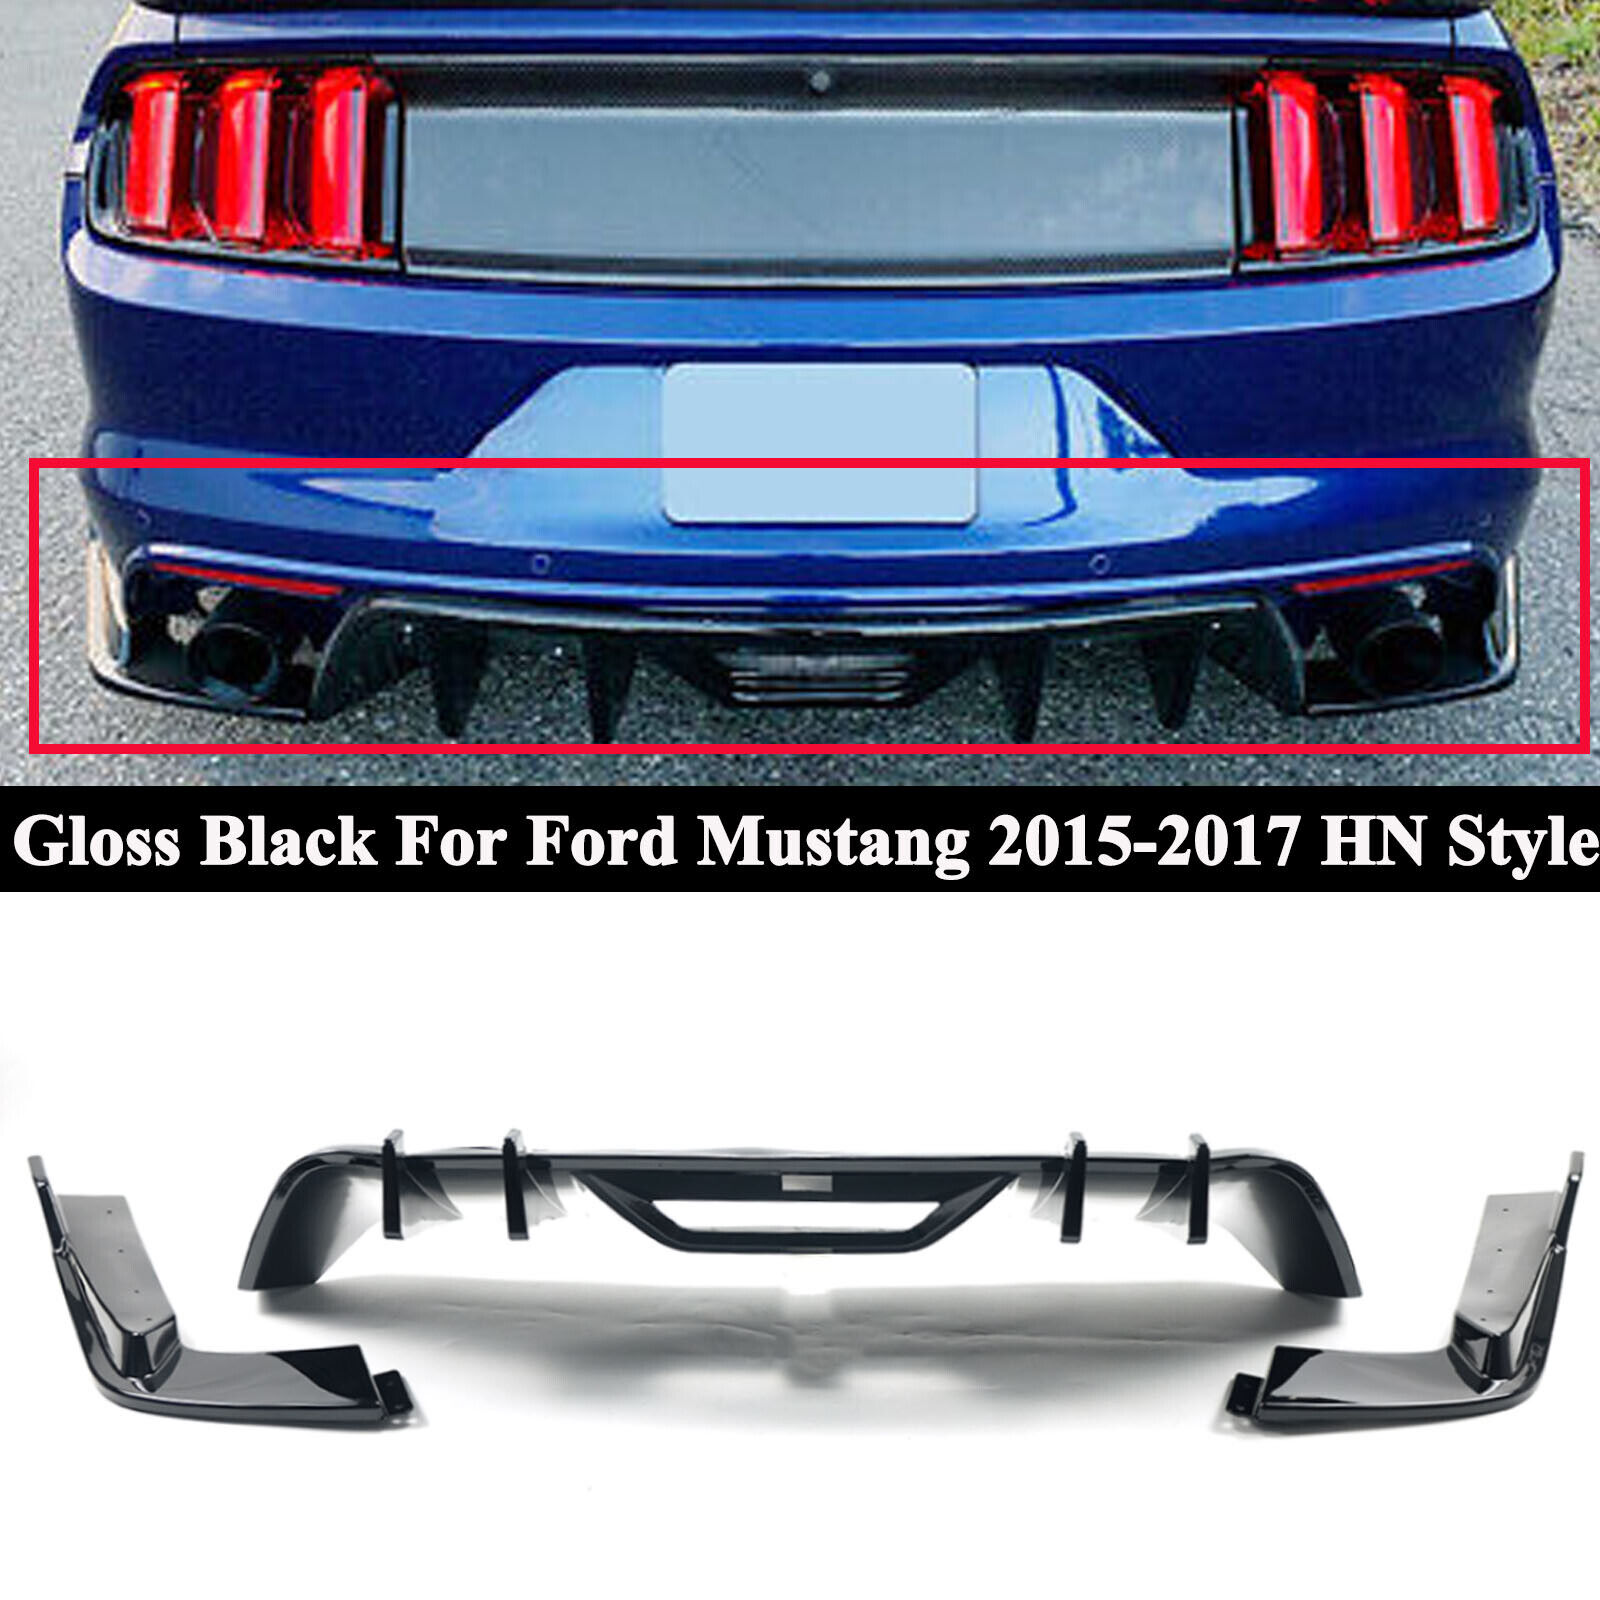 For Ford Mustang 15-2017 HN Style Rear Bumper Diffuser + Apron Spats Gloss Black